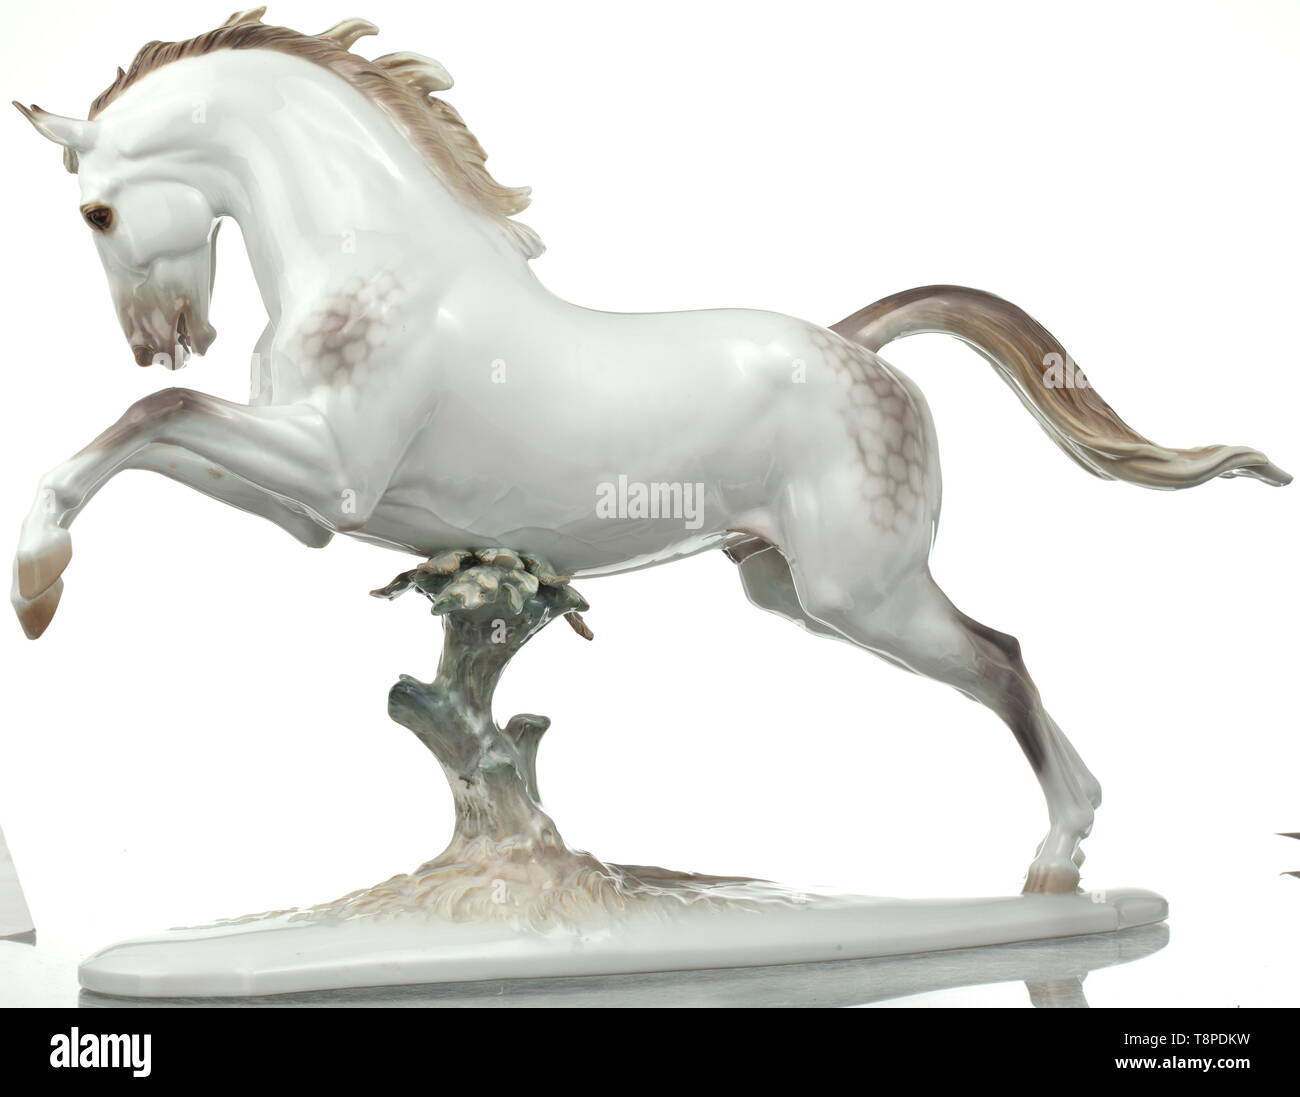 Rampant horse in polychrome version Design by Prof. Theodor Kärner, model number '74'. Polychrome glazed porcelain. The artist's signature, model number and manufacturer's mark 'SS' within an octagon on the bottom. Excellent state of preservation, unrestored. Height circa 33 cm. An extremely rare animal figure by the PMA. According to Porell, the three polychrome variants were only produced in 1939 (Porell, Allach Porcelain, vol. II, 2010, p. 431). historic, historical, porcelain, chinaware, 20th century, Editorial-Use-Only Stock Photo